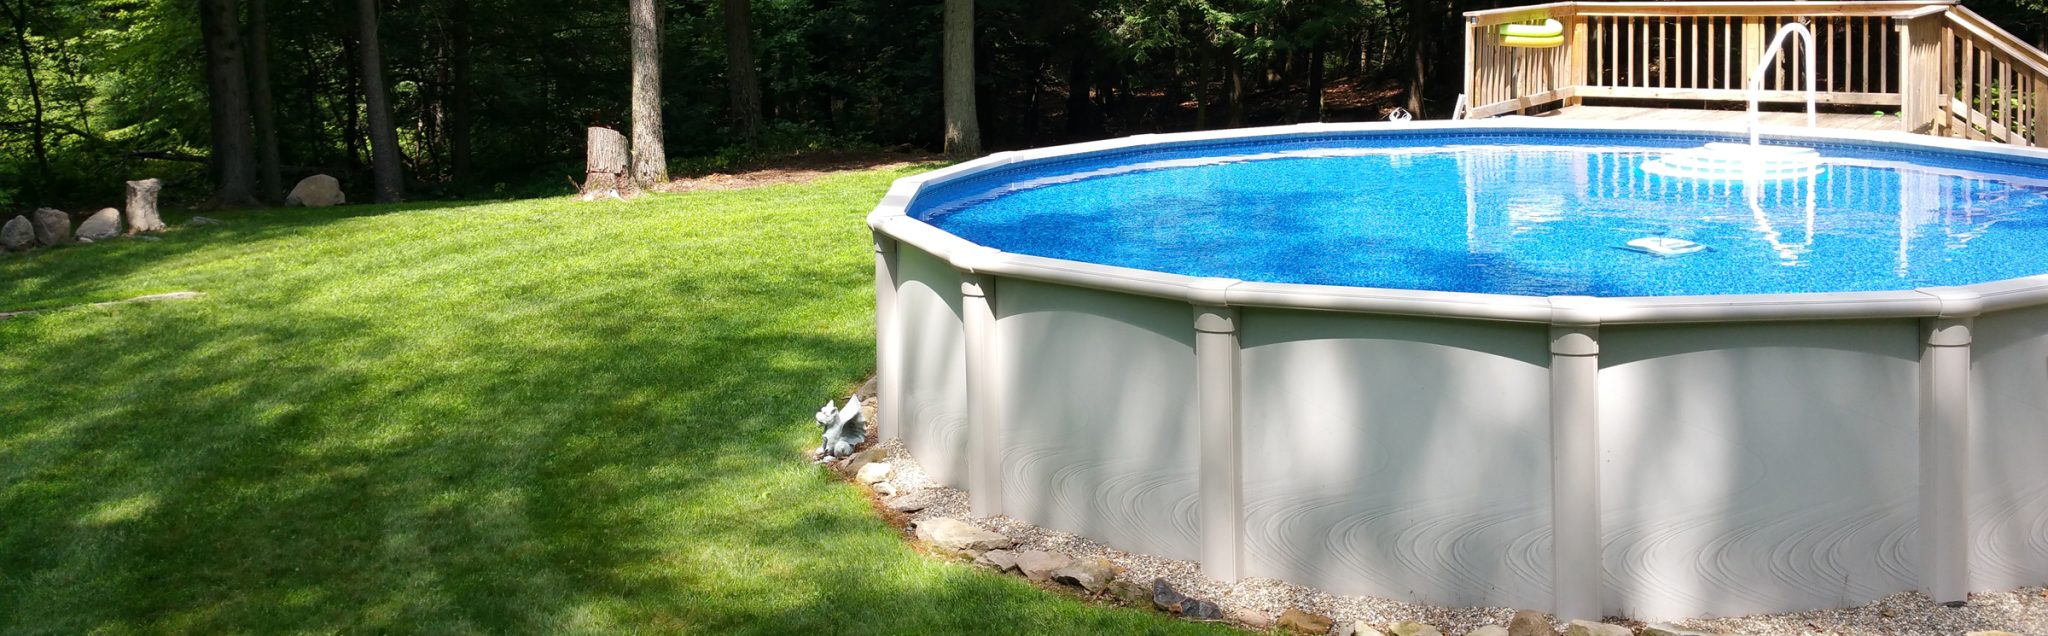 Above Ground Pools from Teddy Bear Pools and Spa